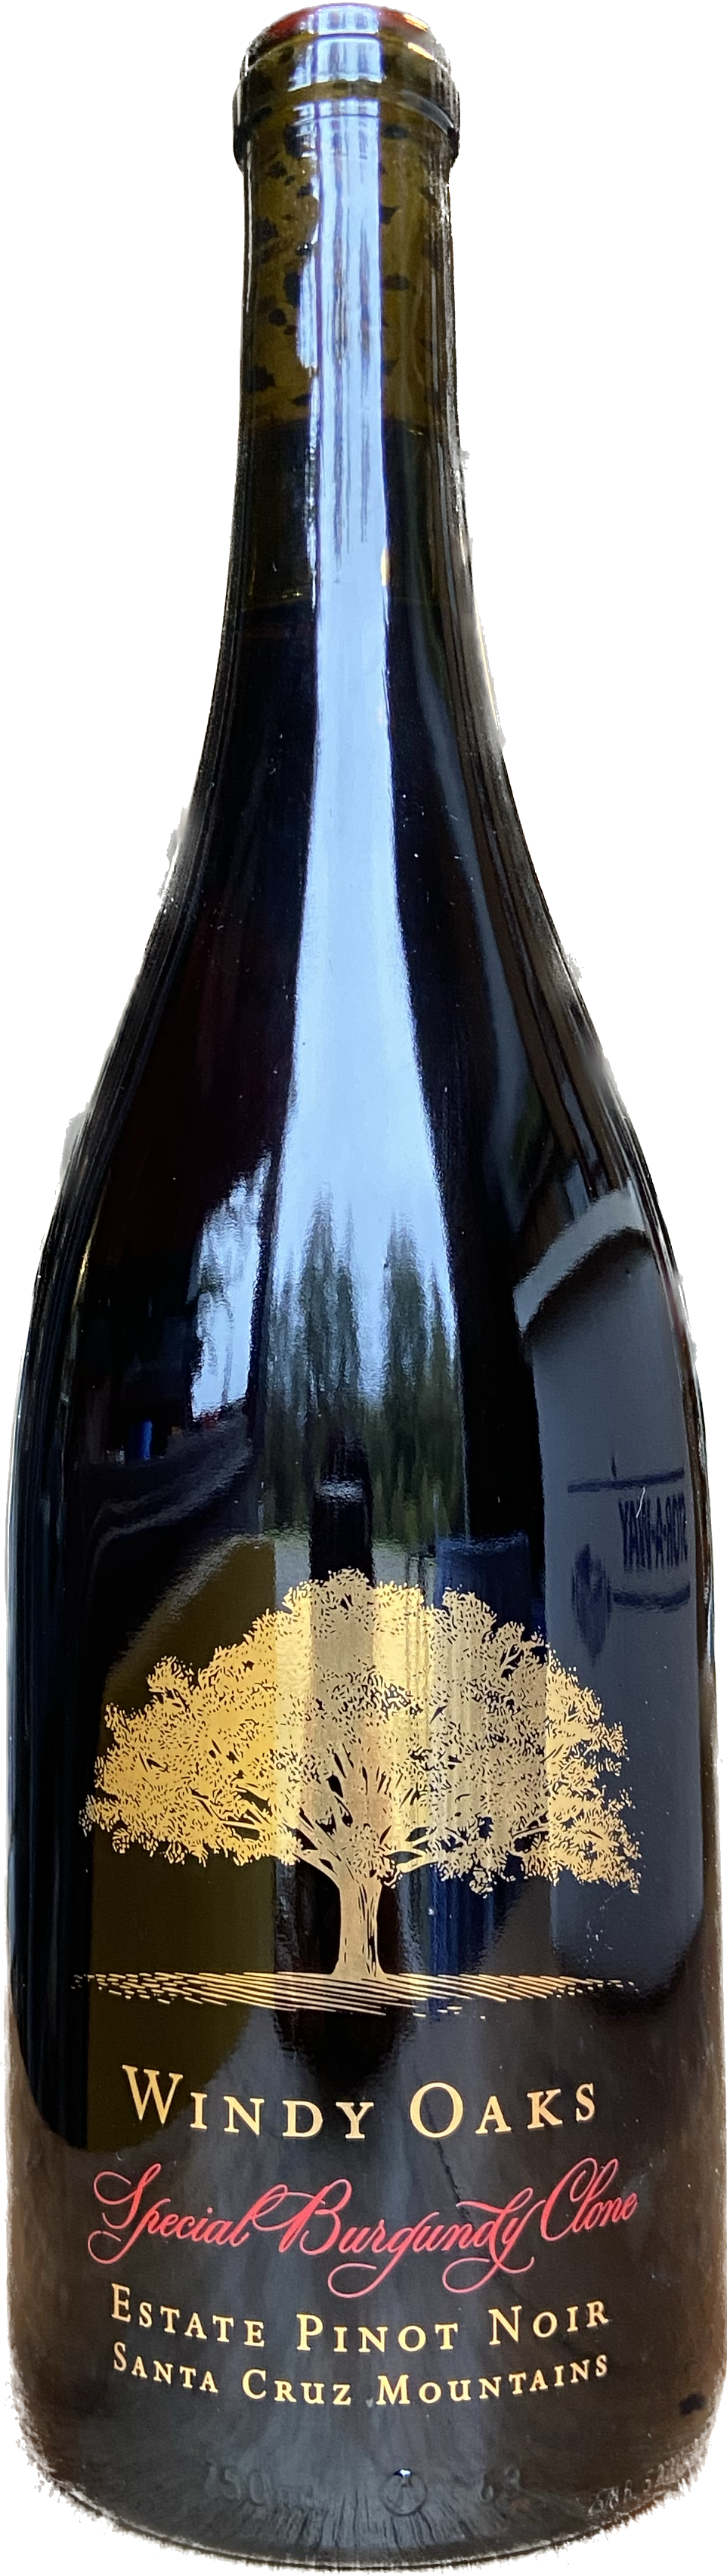 Product Image for 2019 Estate Pinot Noir, Special Burgundy Clone